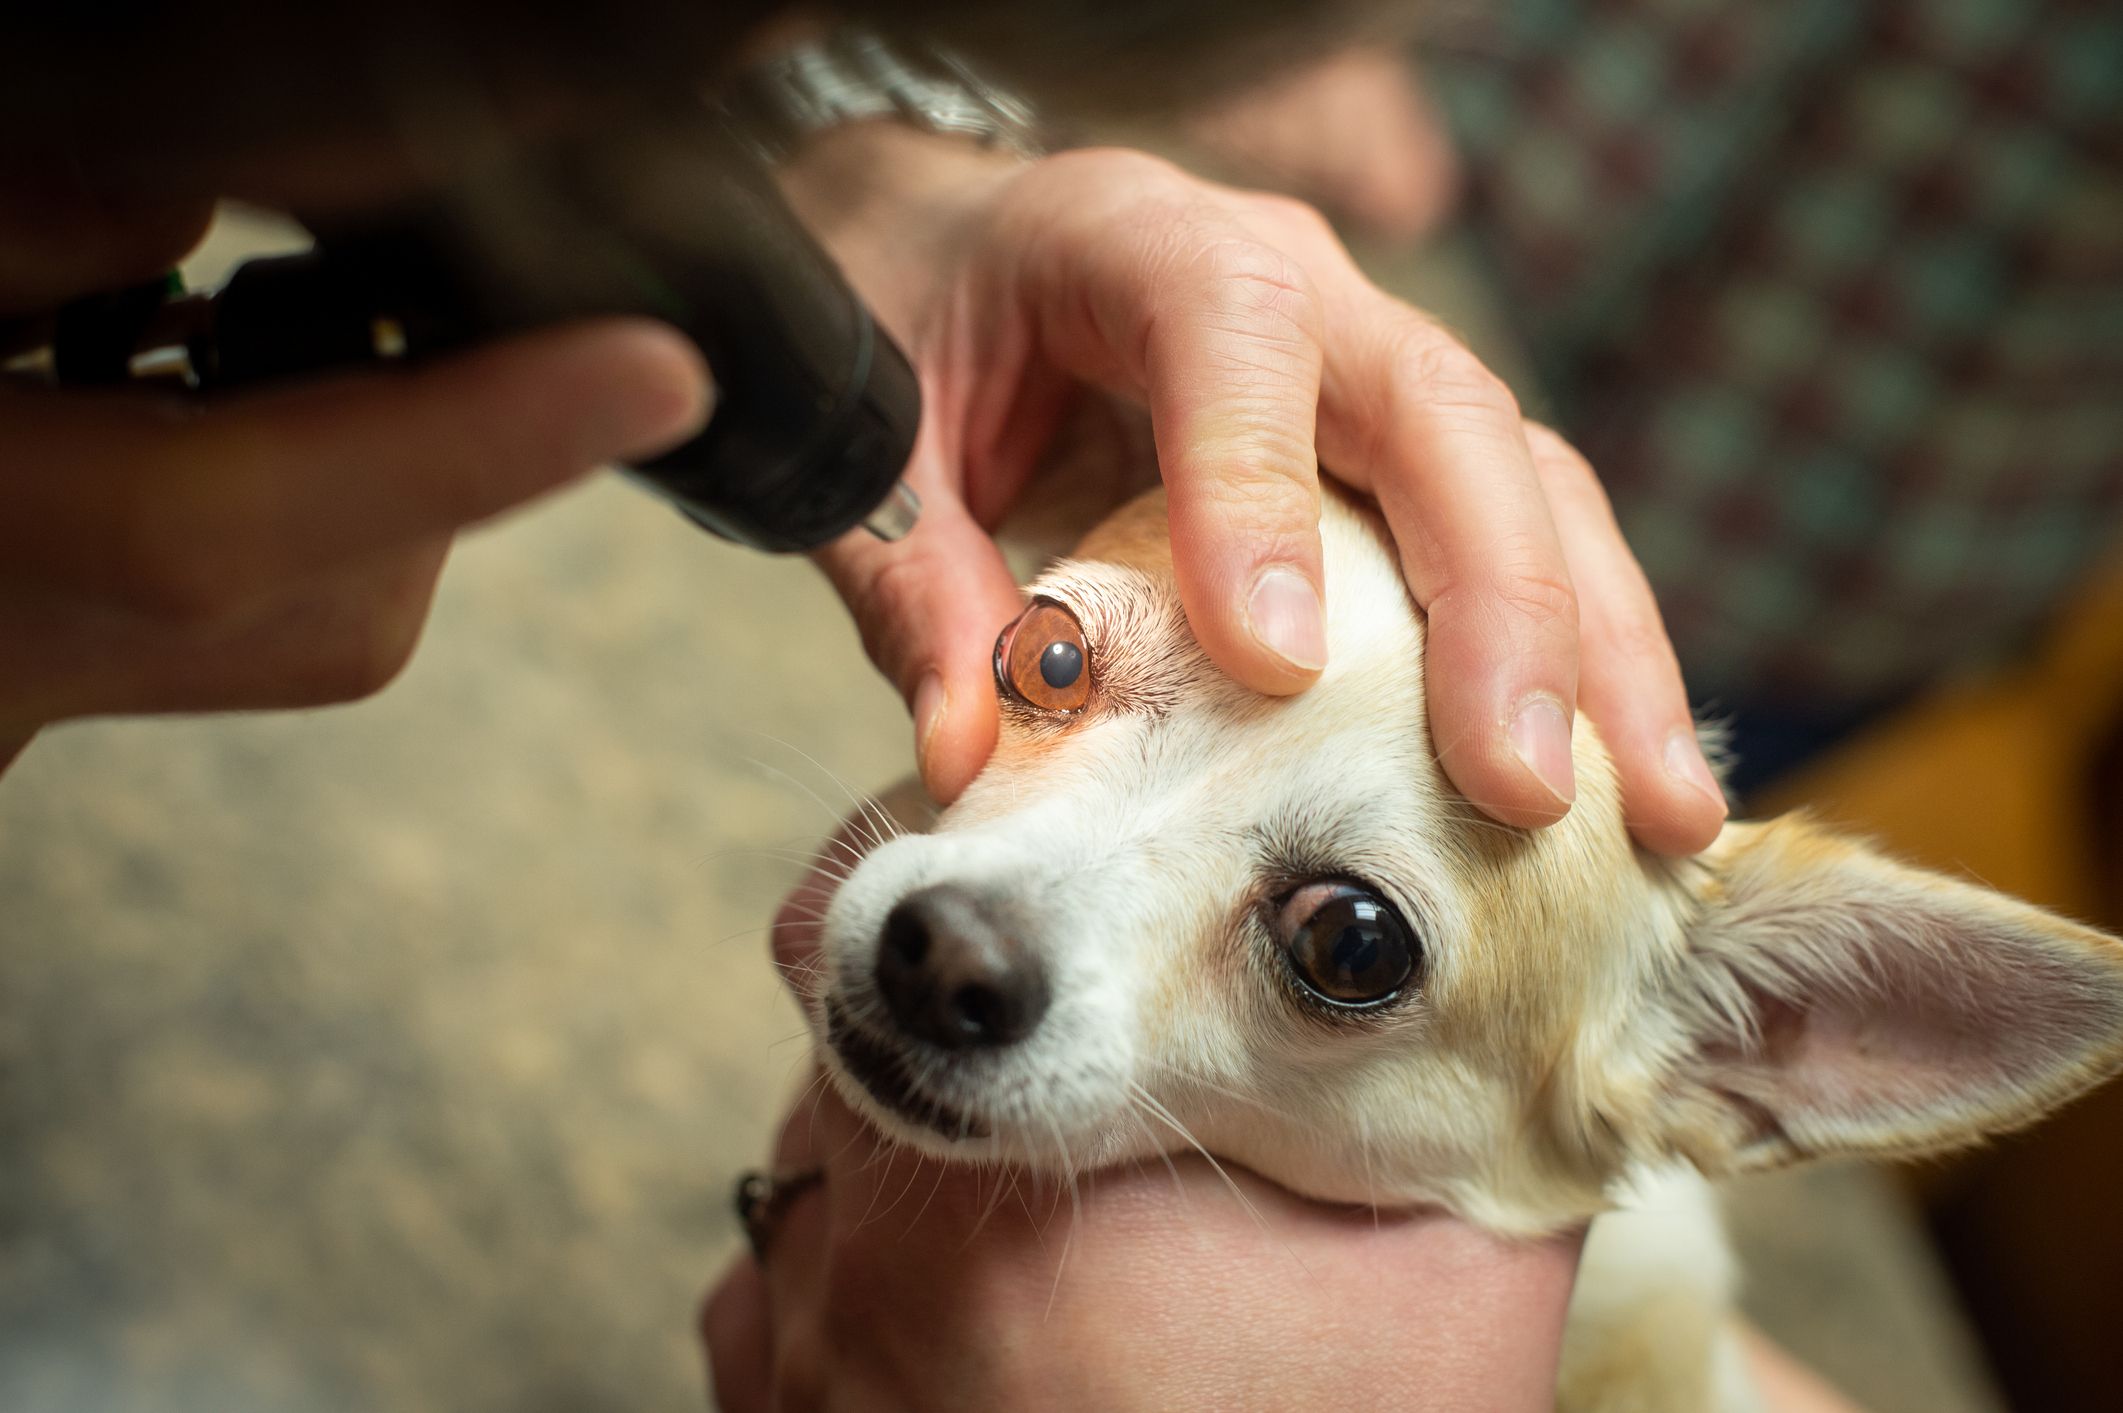 Causes of Blindness & How to Care for Blind Dogs